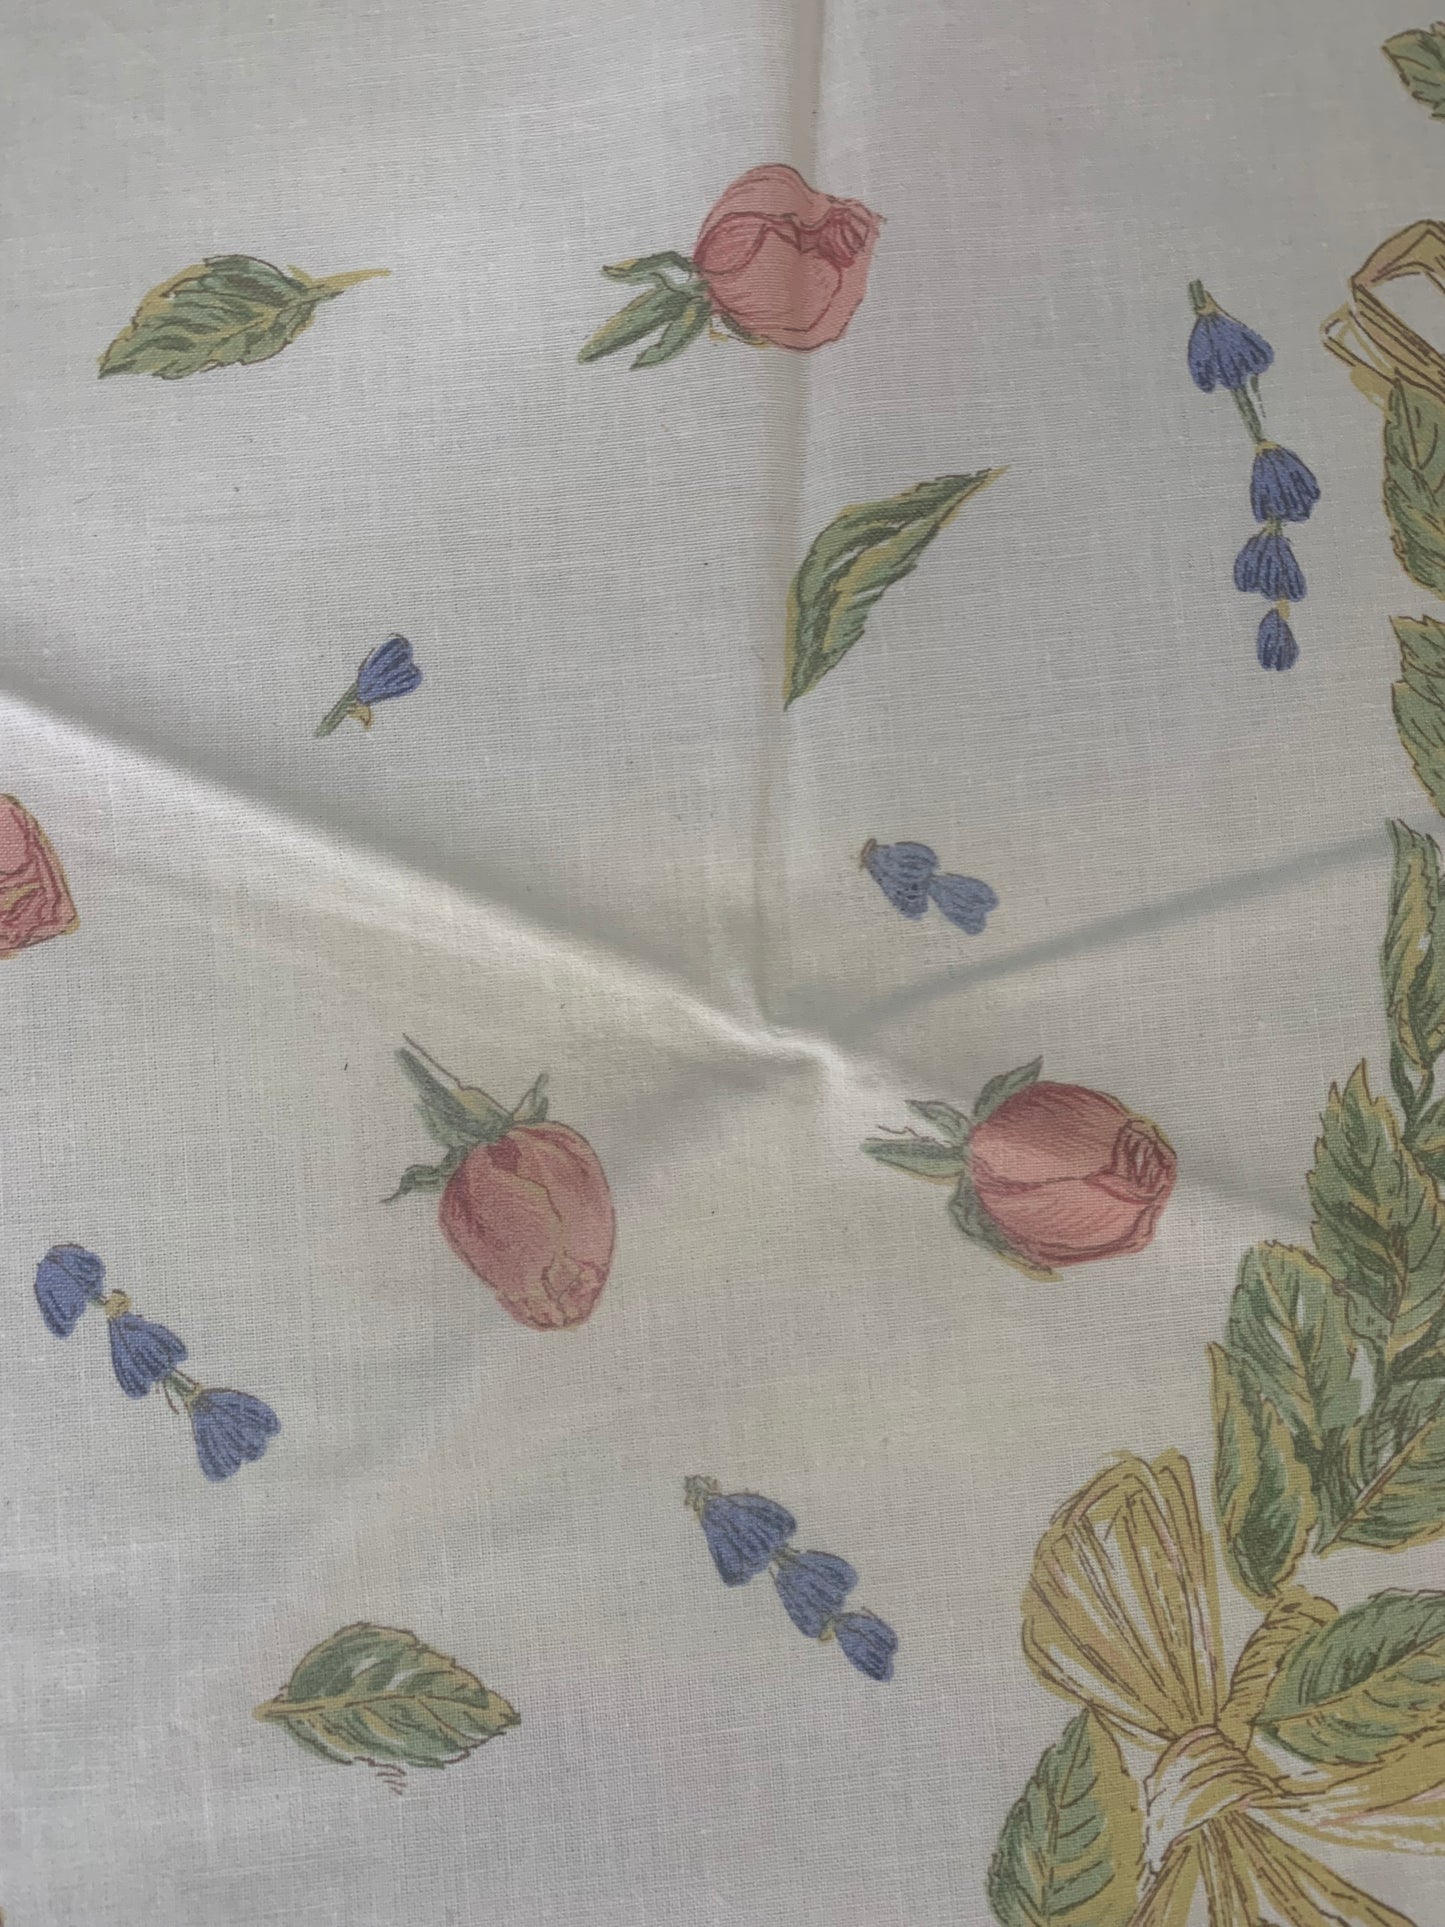 OILCLOTH-68" Coated Roses & Lavender Round Tablecloth 50% Off With a Light Stain